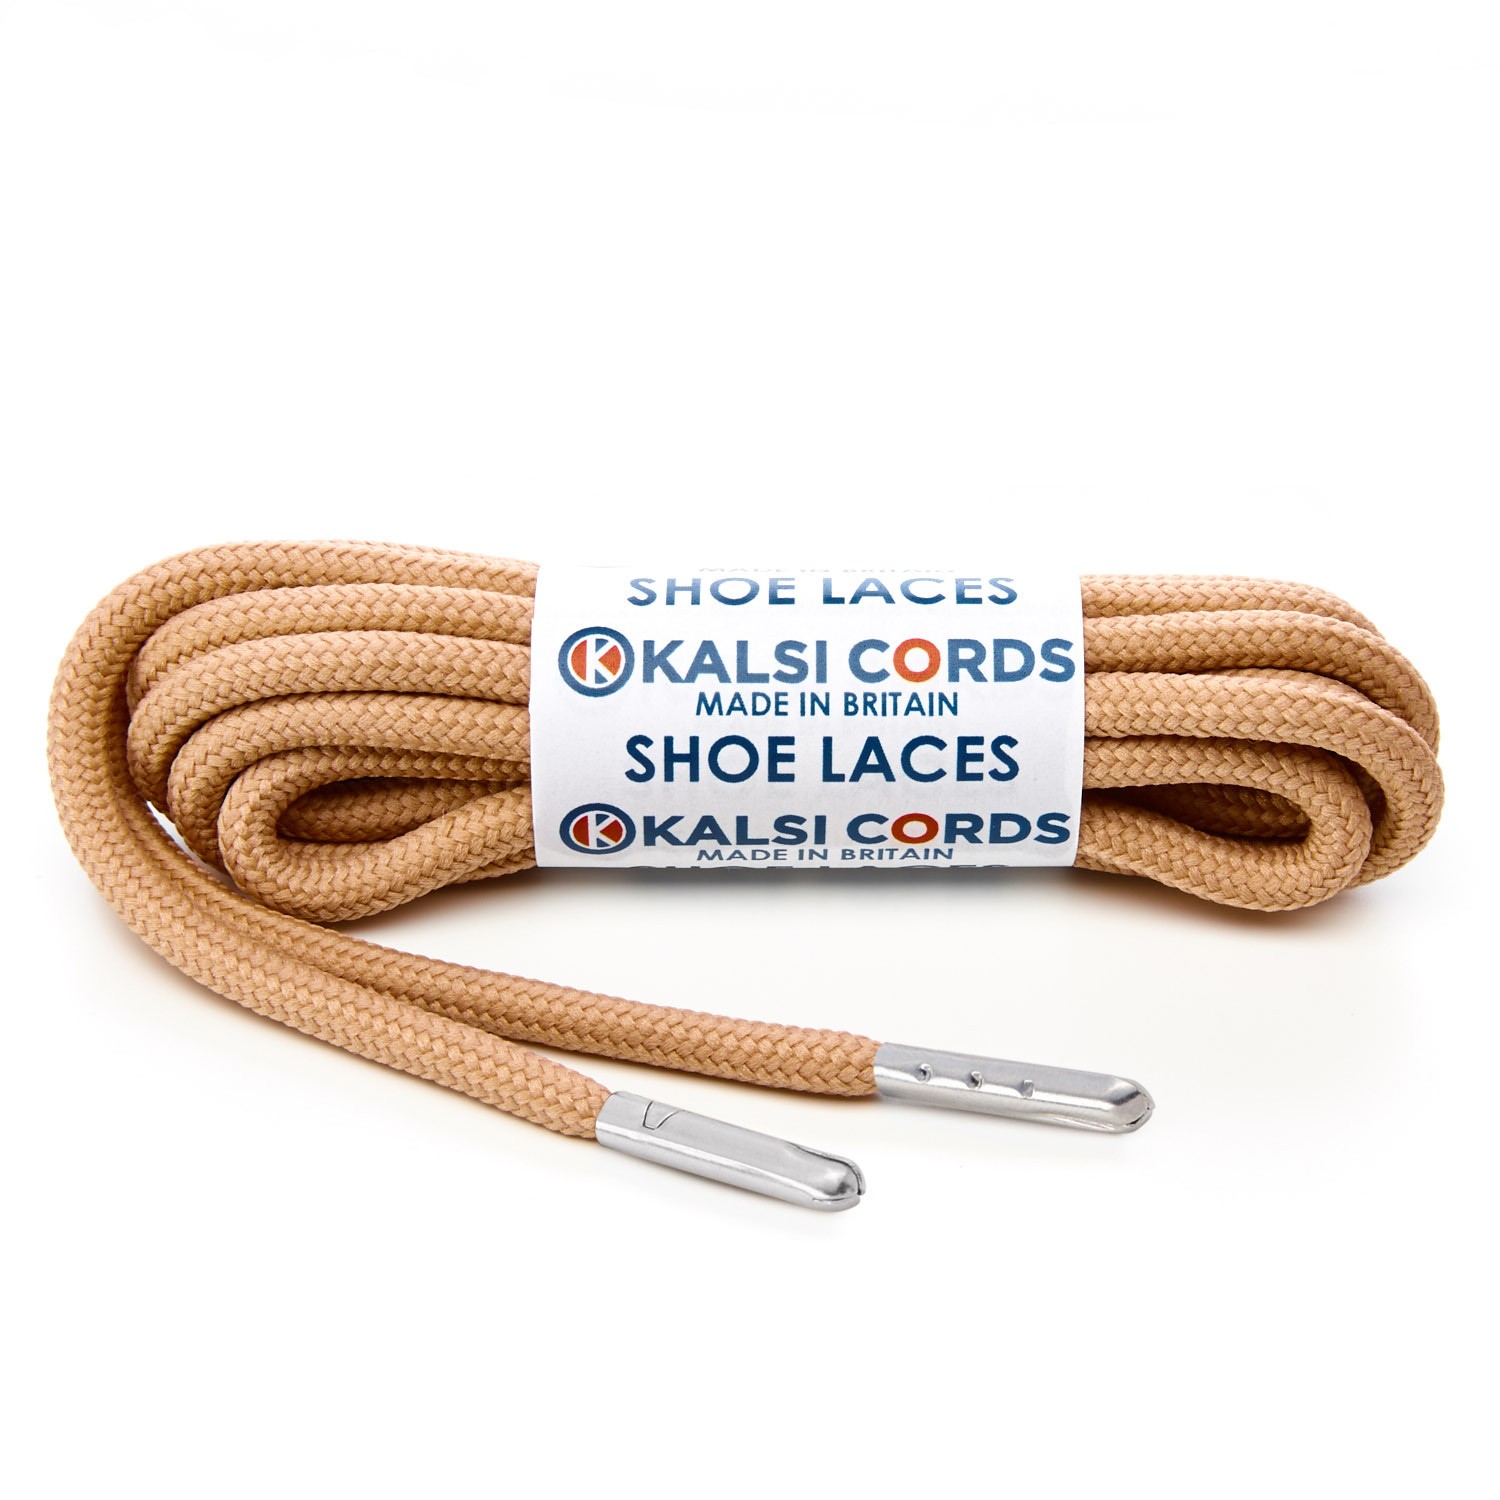 T621 5mm Round Polyester Shoe Laces Dark Beige 1 Silver Metal Tip Kalsi Cords